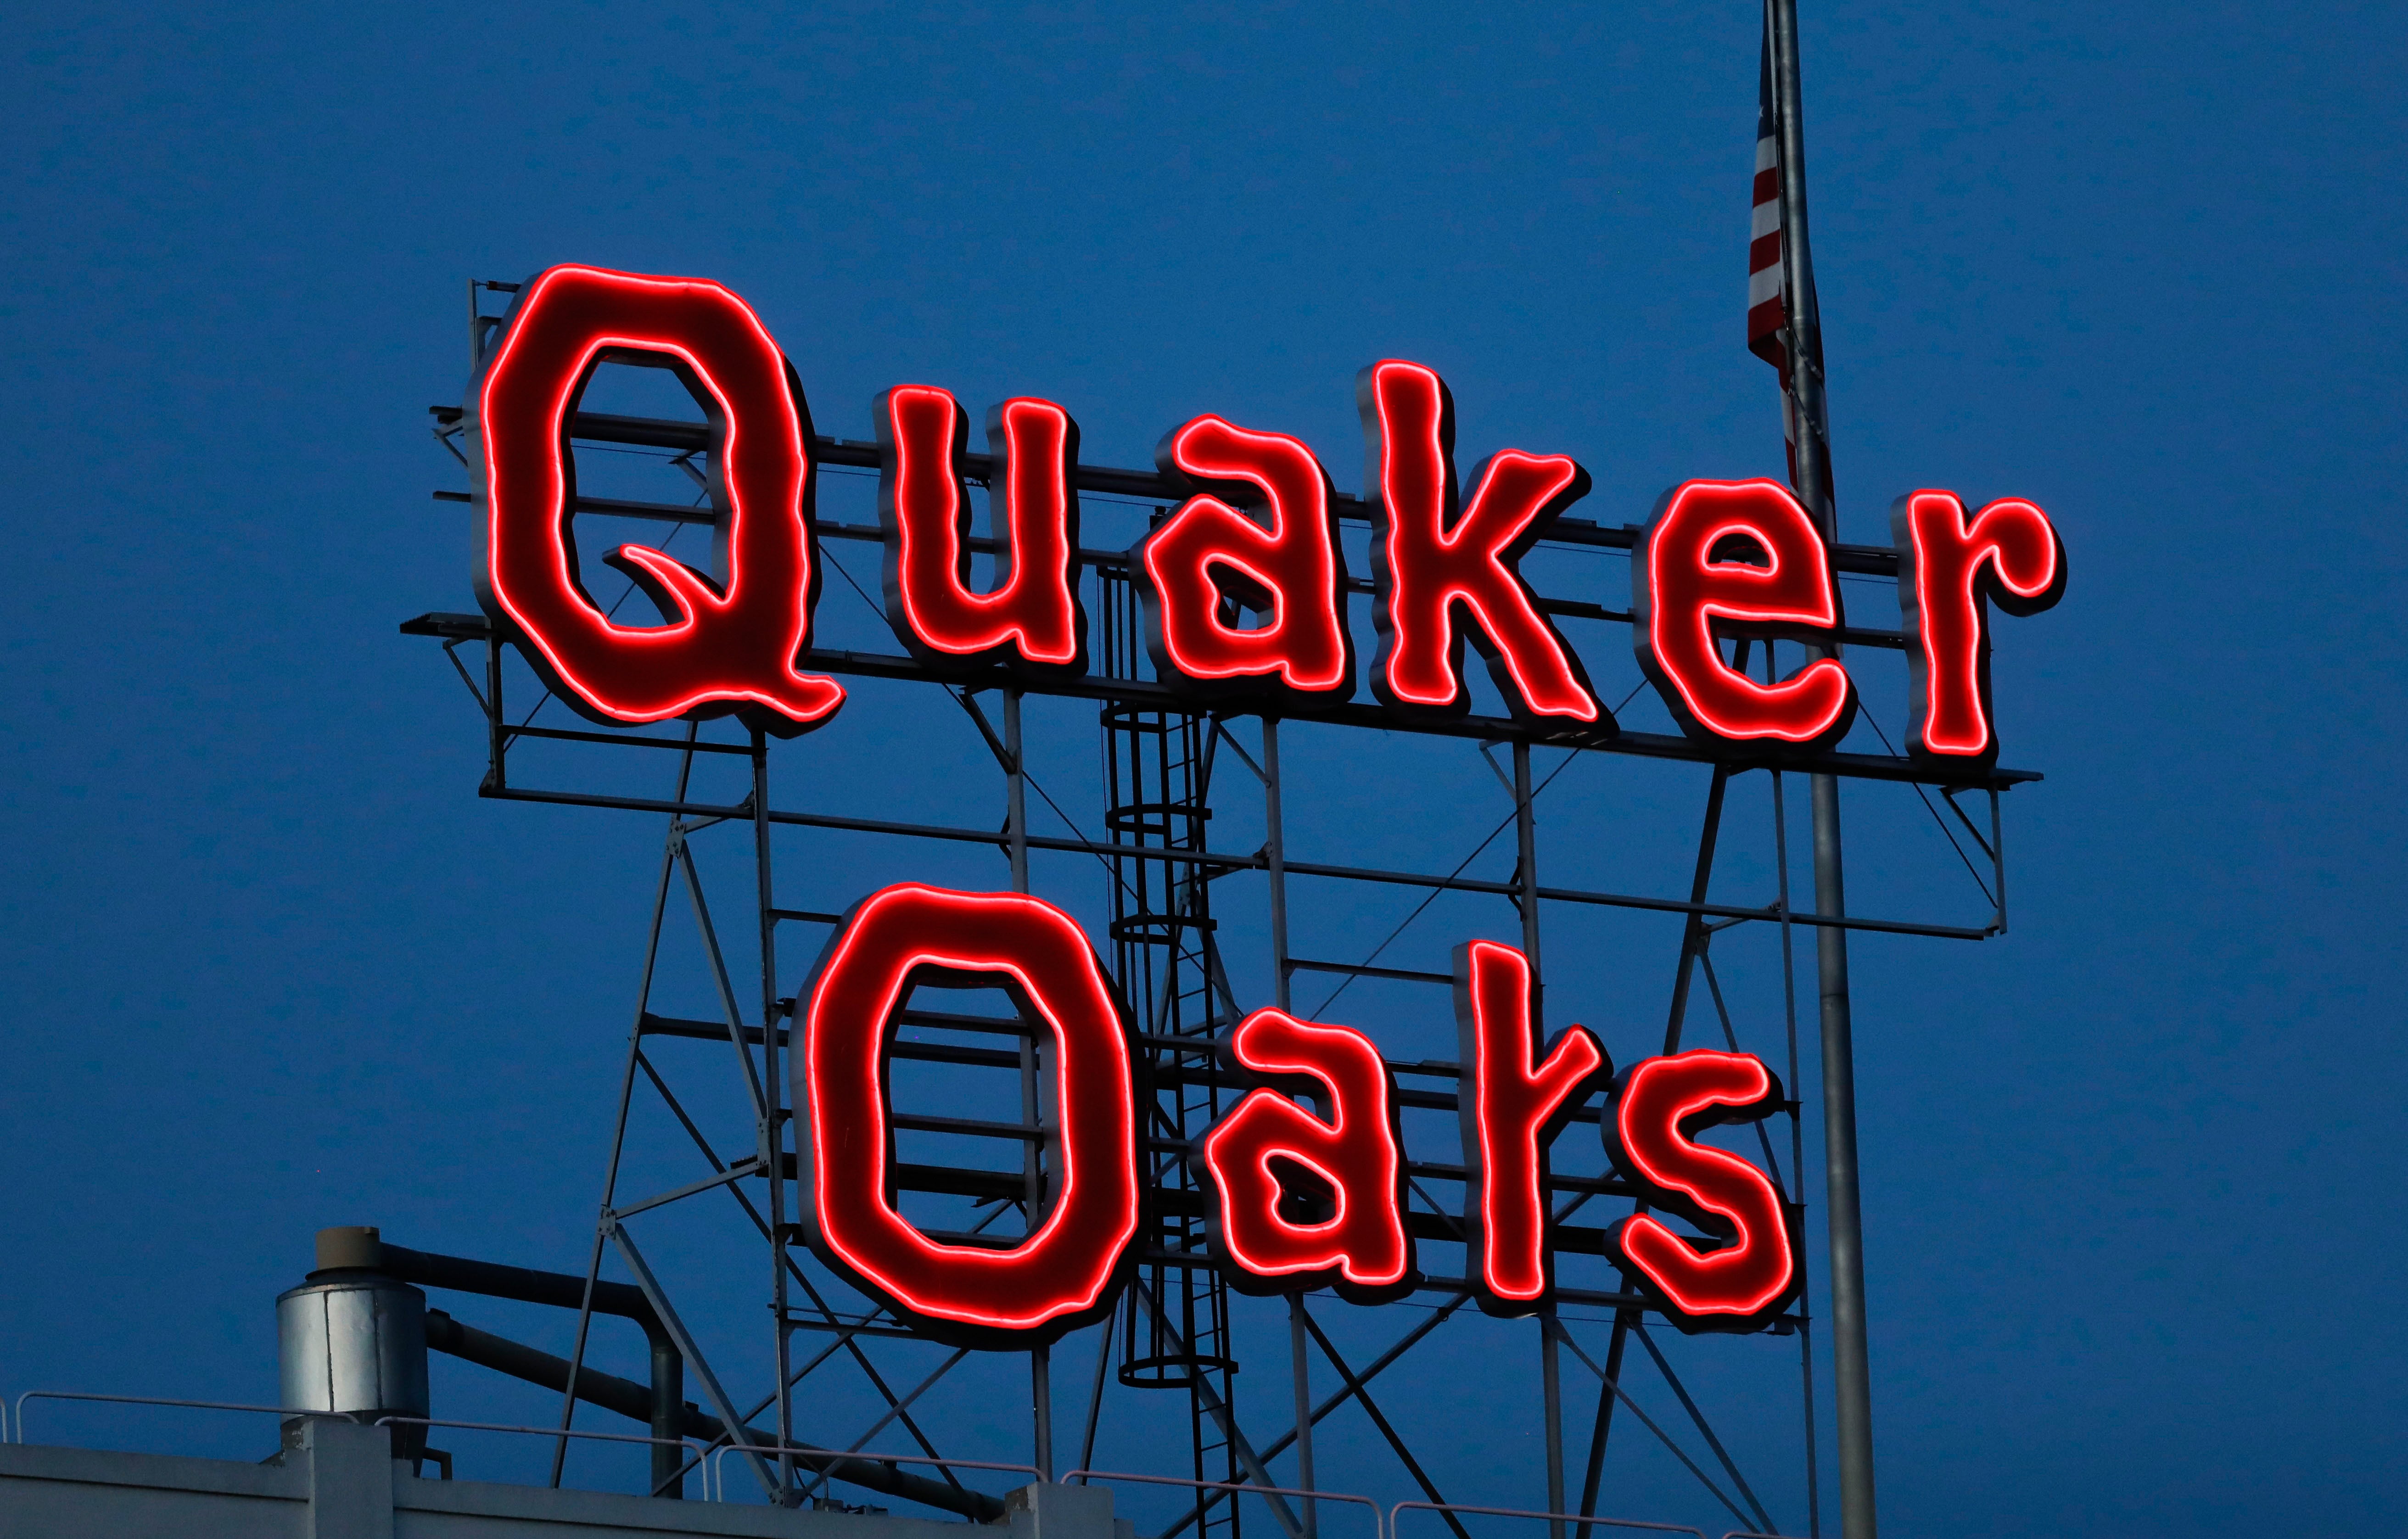 Quaker Oats expands recall of products with salmonella risk The